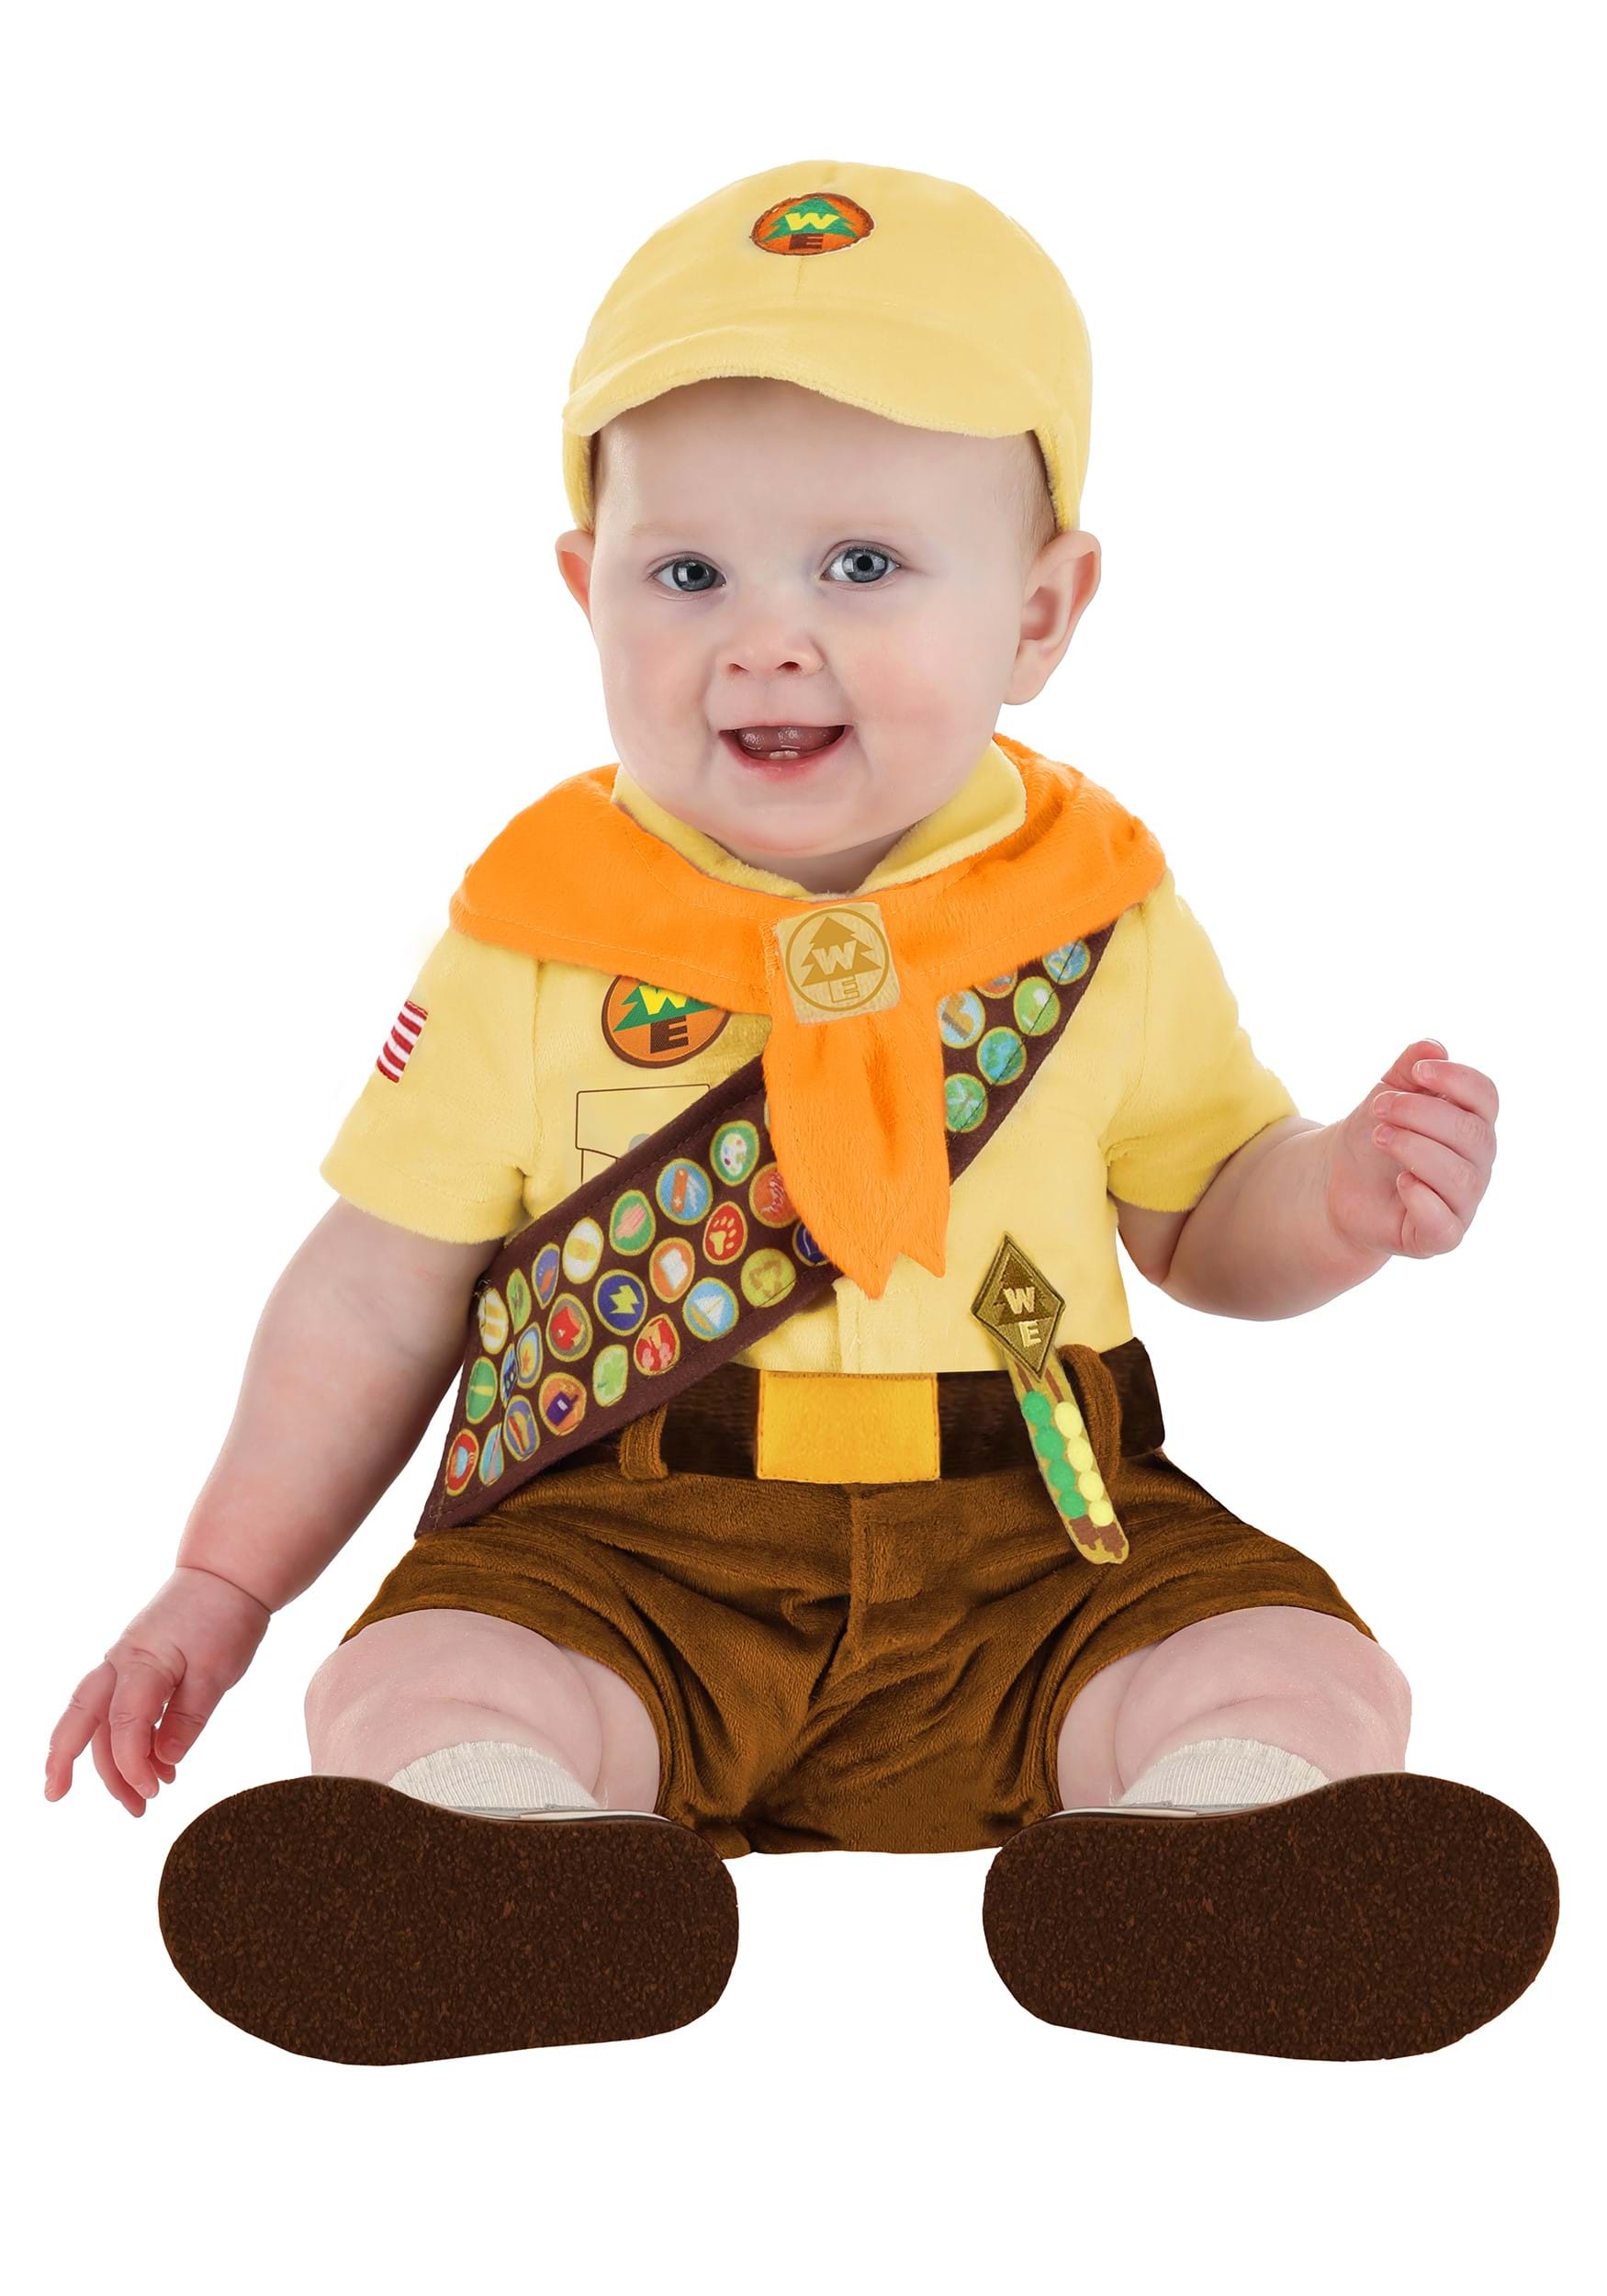 Pokemon Family Costume - Photo 2/3 in 2023  Baby first halloween, Baby  costumes, Cute baby pictures